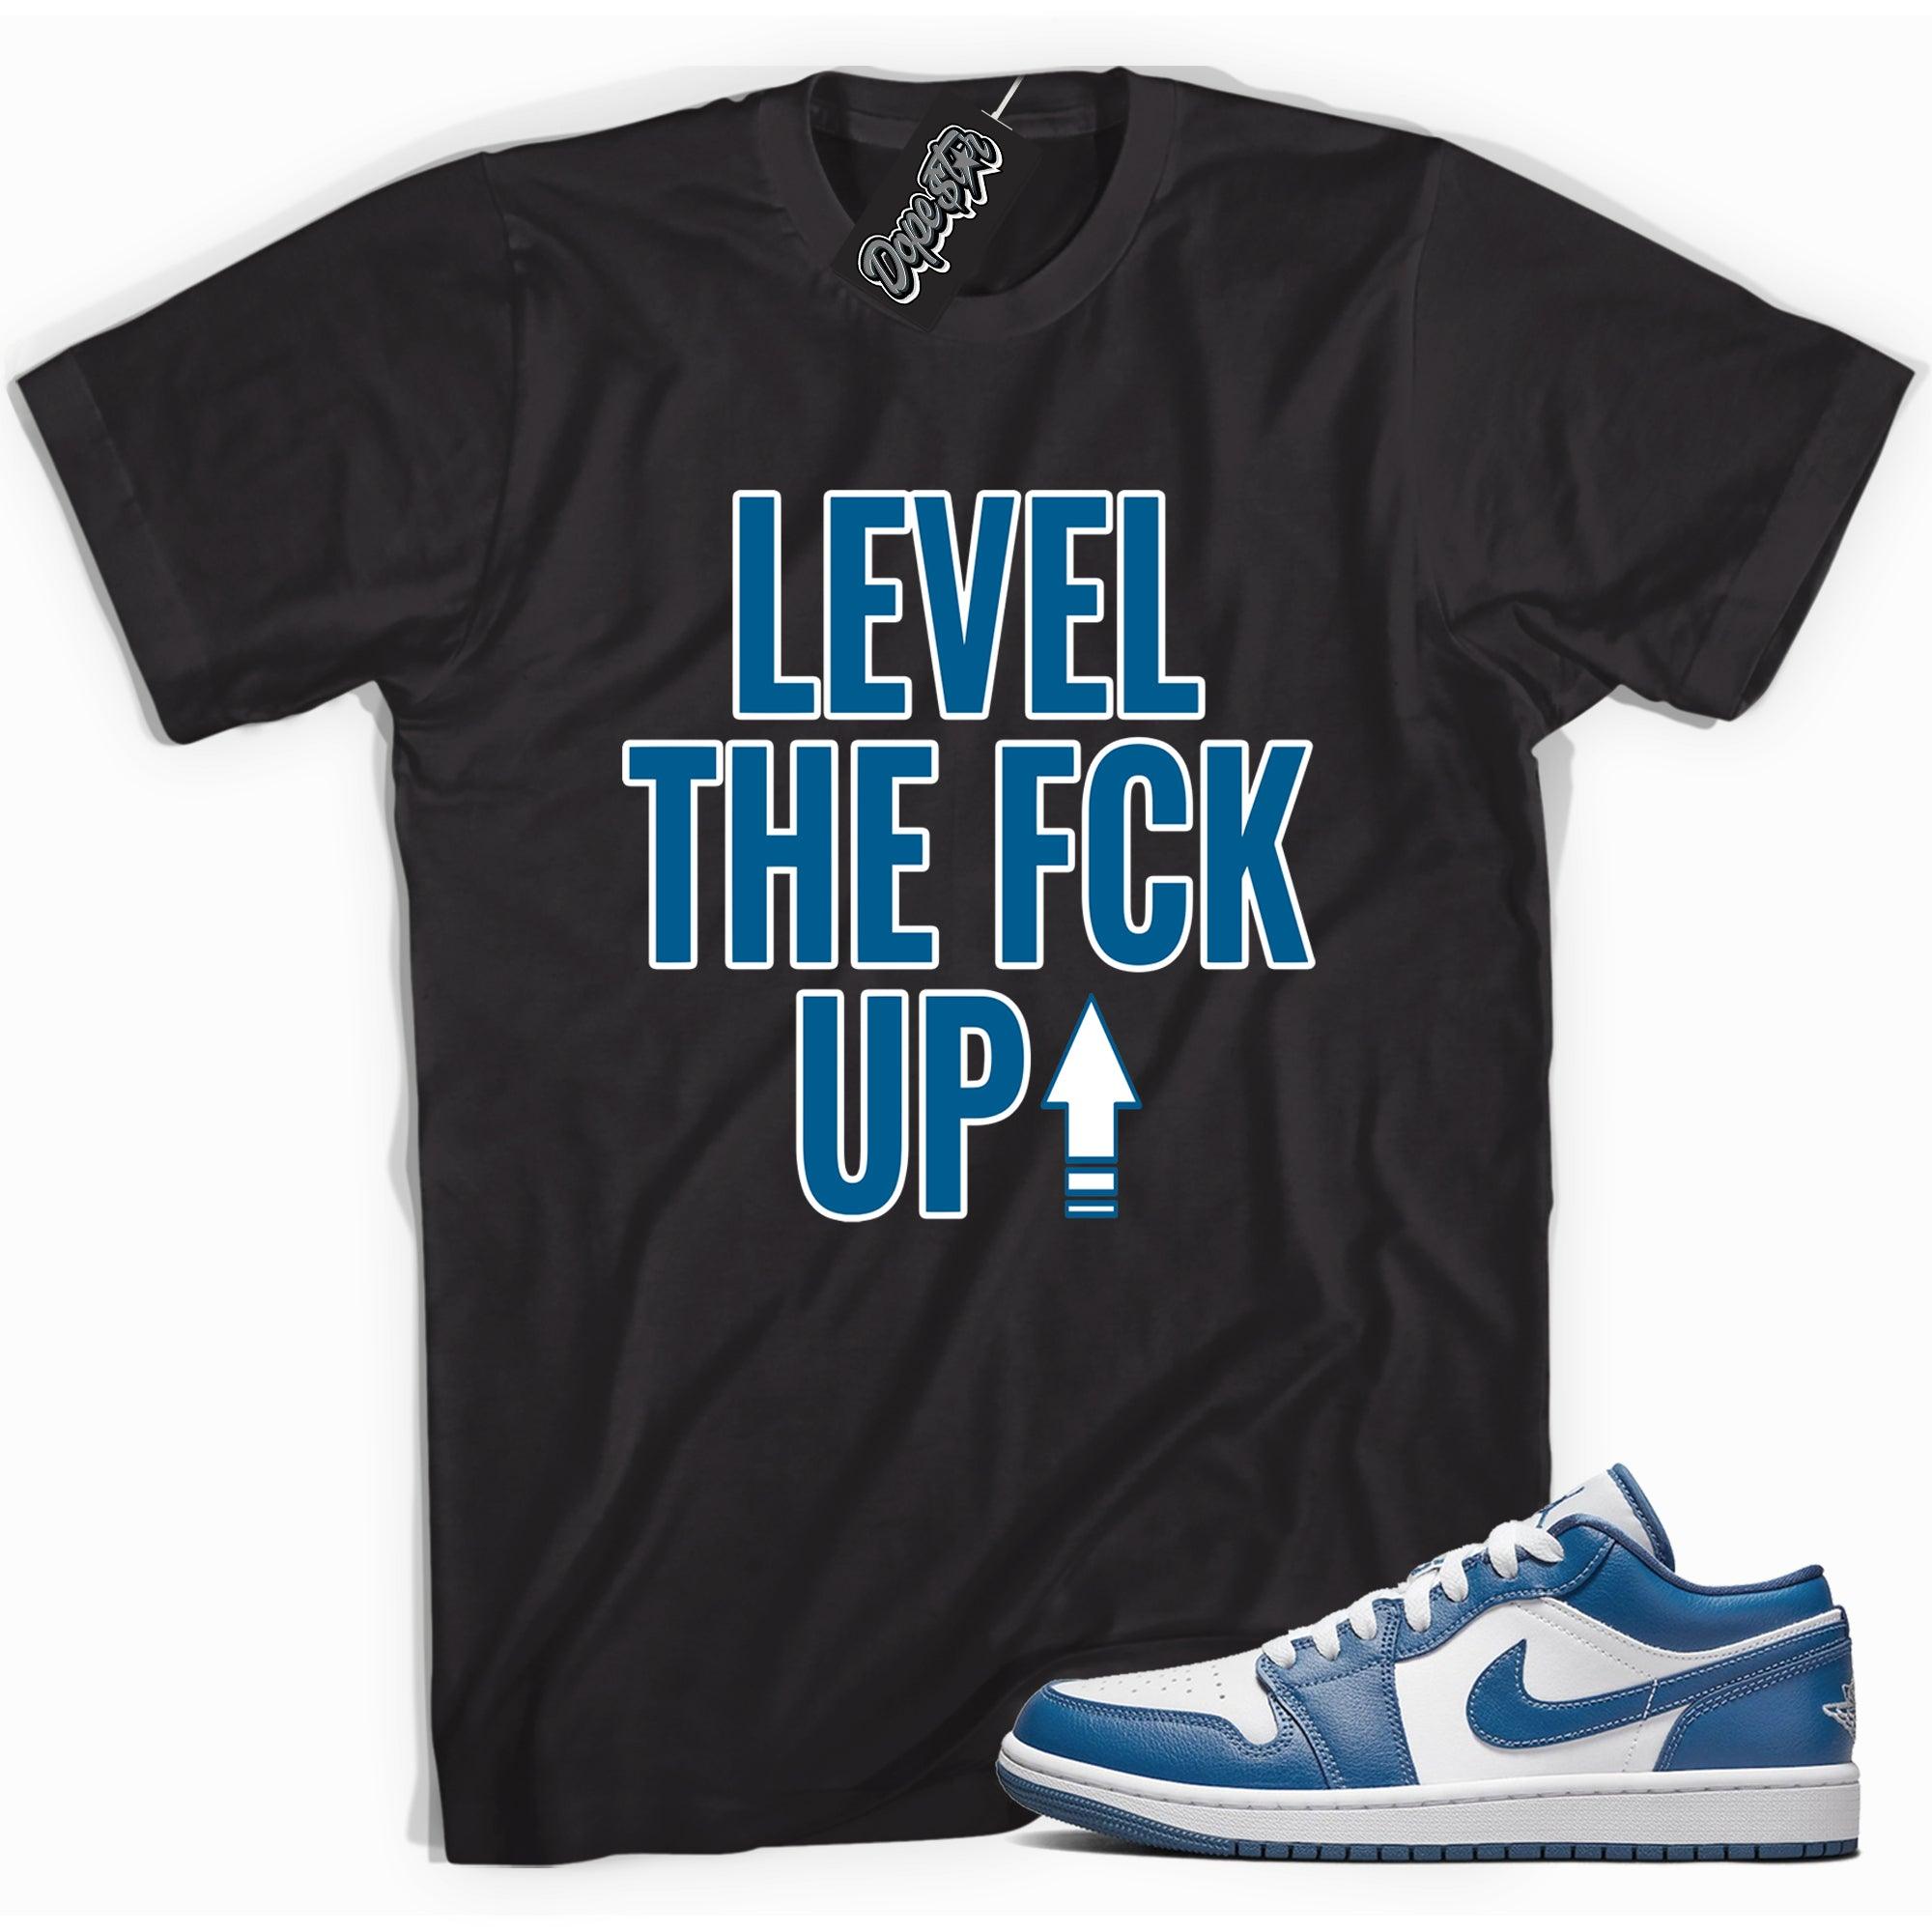 Cool black graphic tee with 'Level Up' print, that perfectly matches Air Jordan 1 1 Low Marina Blue sneakers.